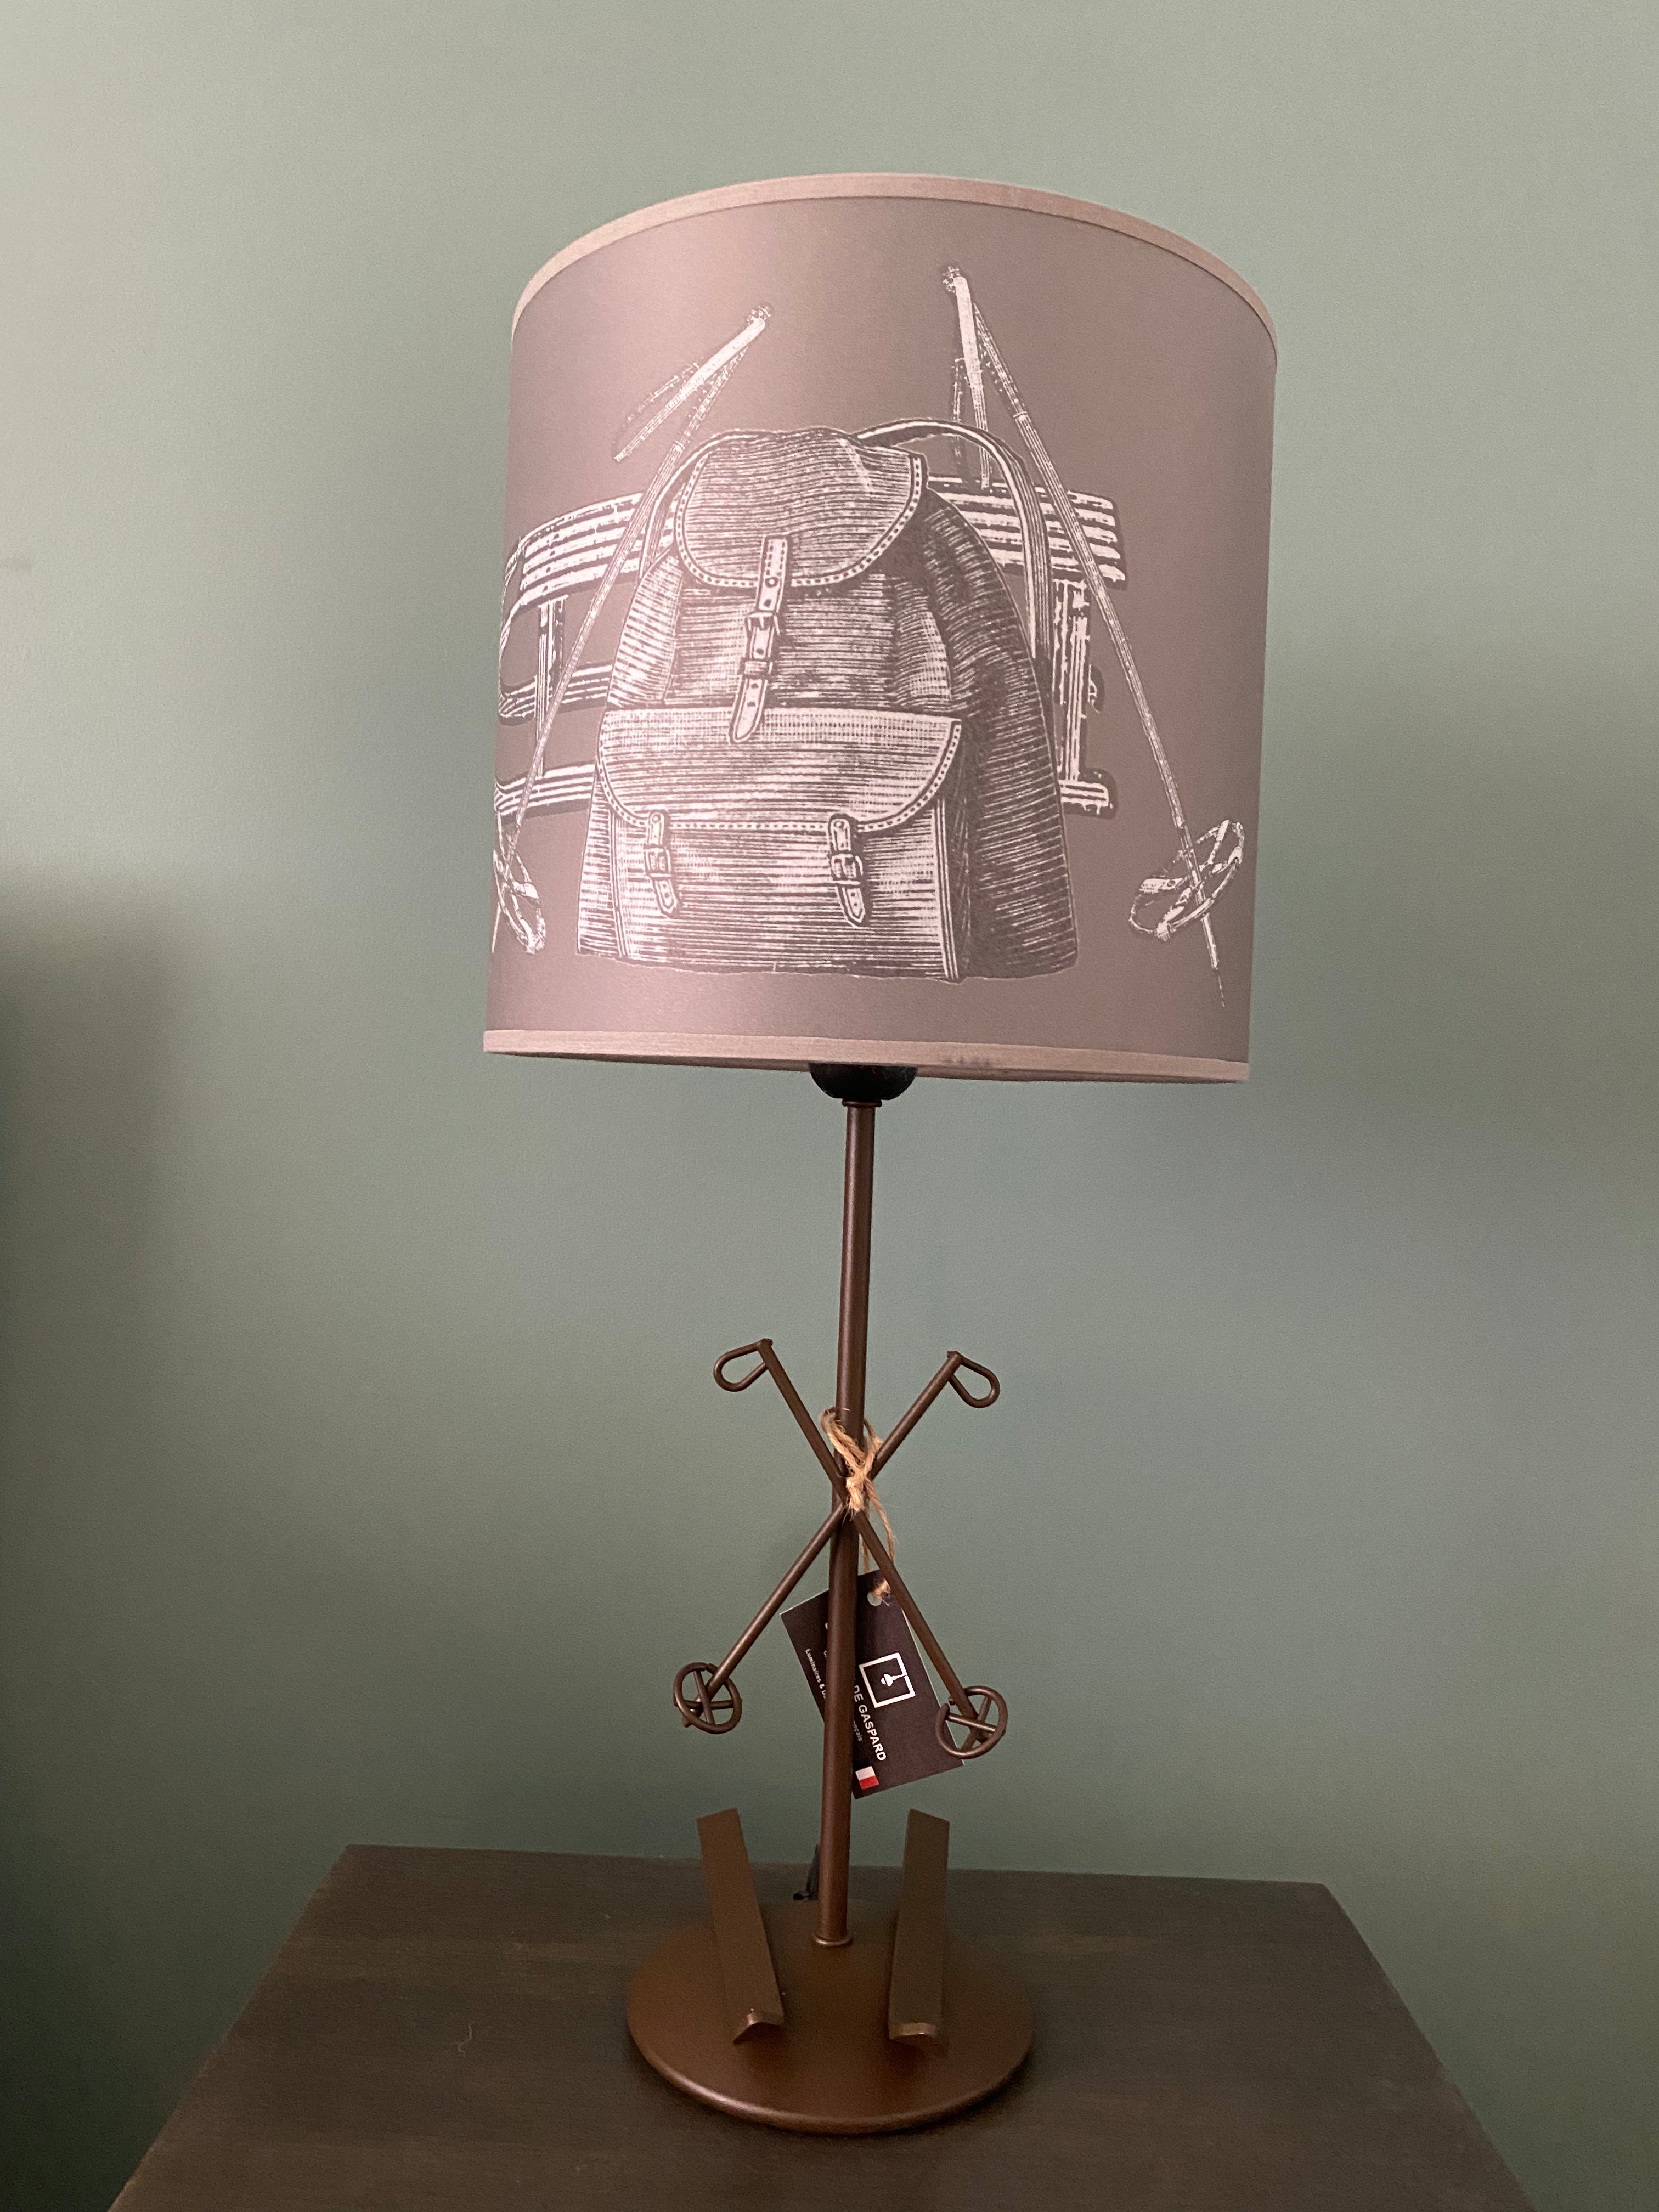 Lamp with a round brown metal base upon which rest a pair of skis supporting a brown metal rod with crossed metal ski poles mid way up the rod, topped by grey printed canvas lamp shade. The shade shows black and white drawing, against a grey background, of a pair of vintage snow goggles, a wooden sled, a pair of vintage ski poles and a vintage backpack. On a wooden table against a green wall.